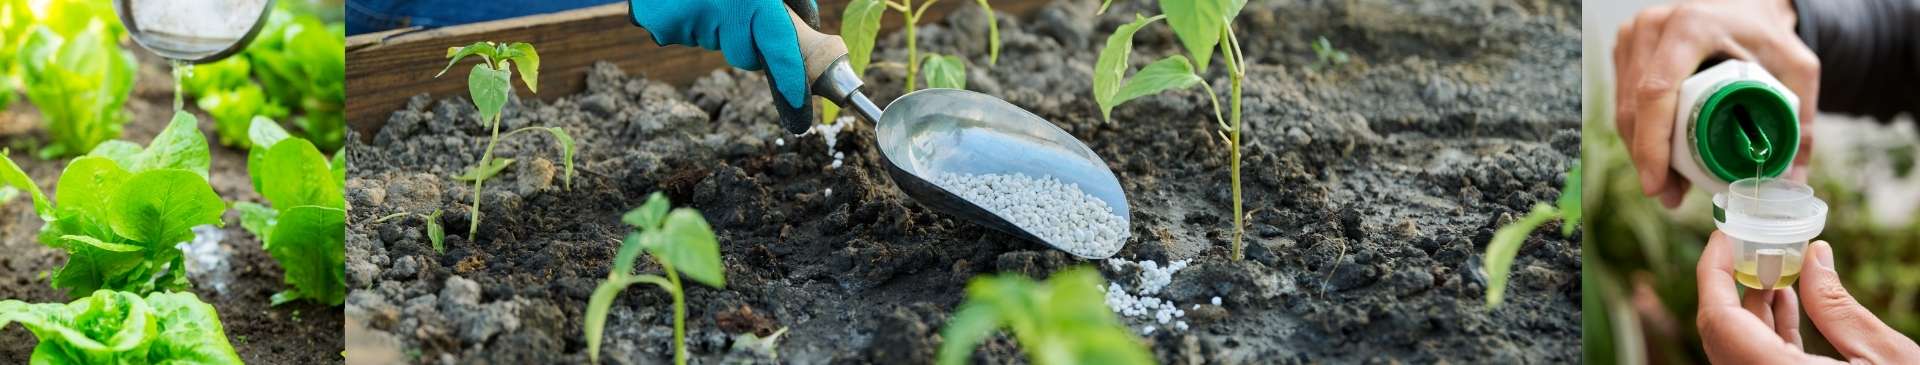 Fertiliser: Why, When and How to Use It